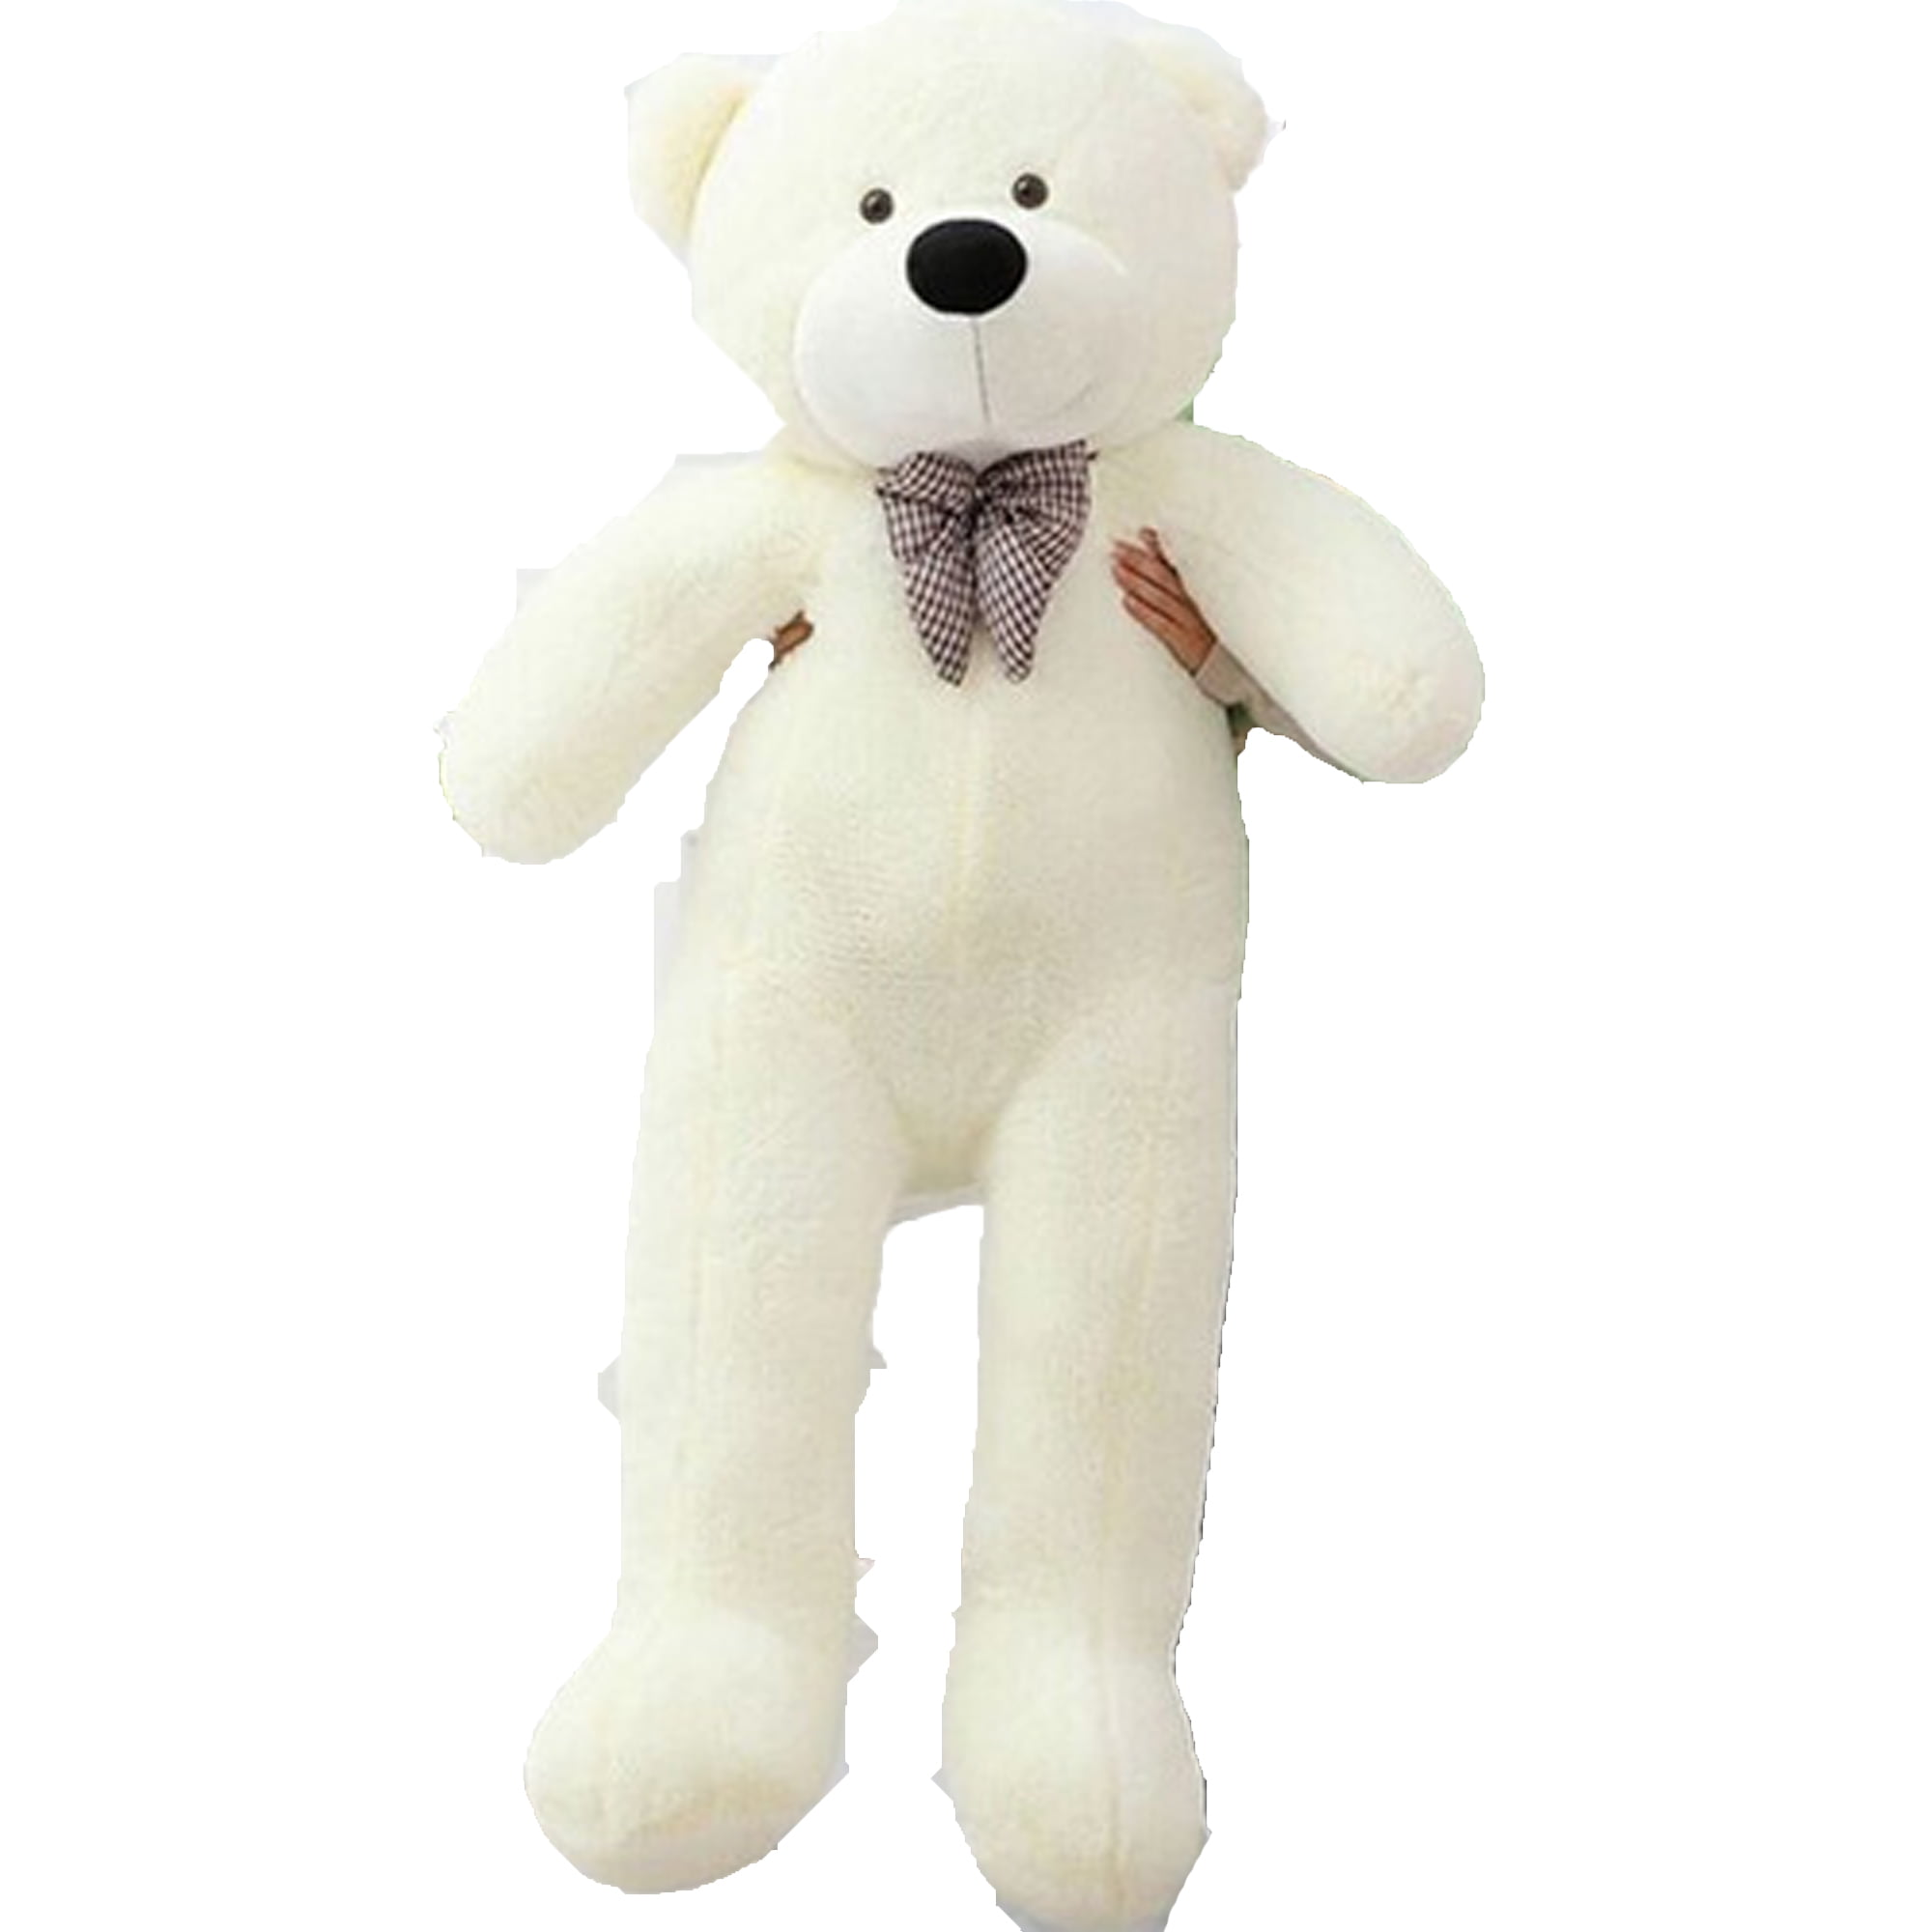 Details about   50cm Giant Large Huge Big Teddy Bear Plush Soft Toys Doll Gift White Only Cover 